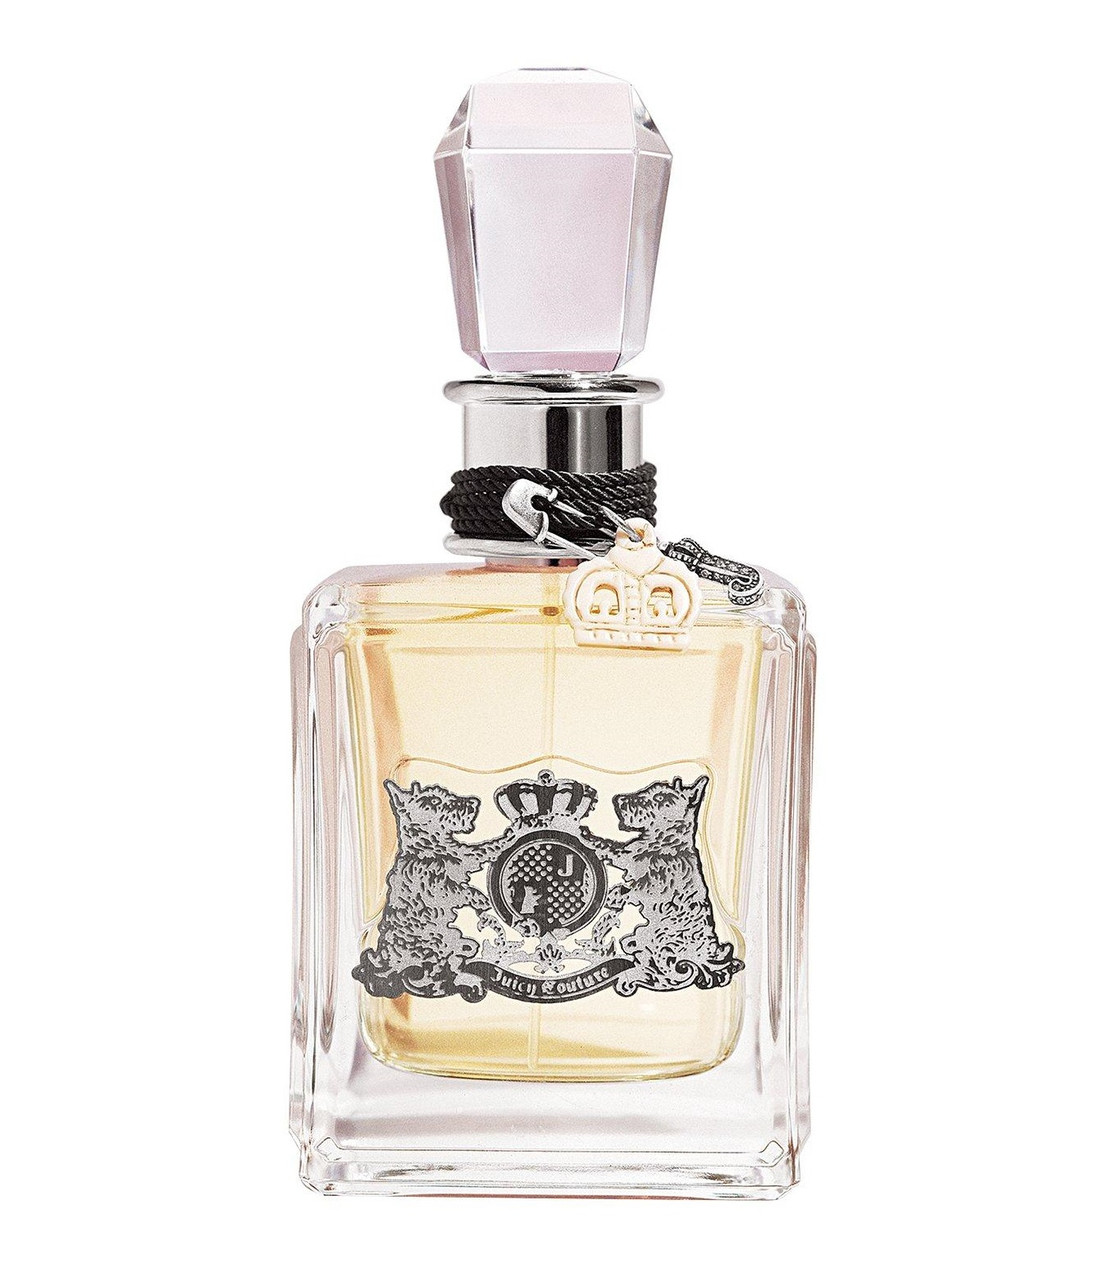 Жіноча парфумерна вода Juicy Couture 100 мл (tester)